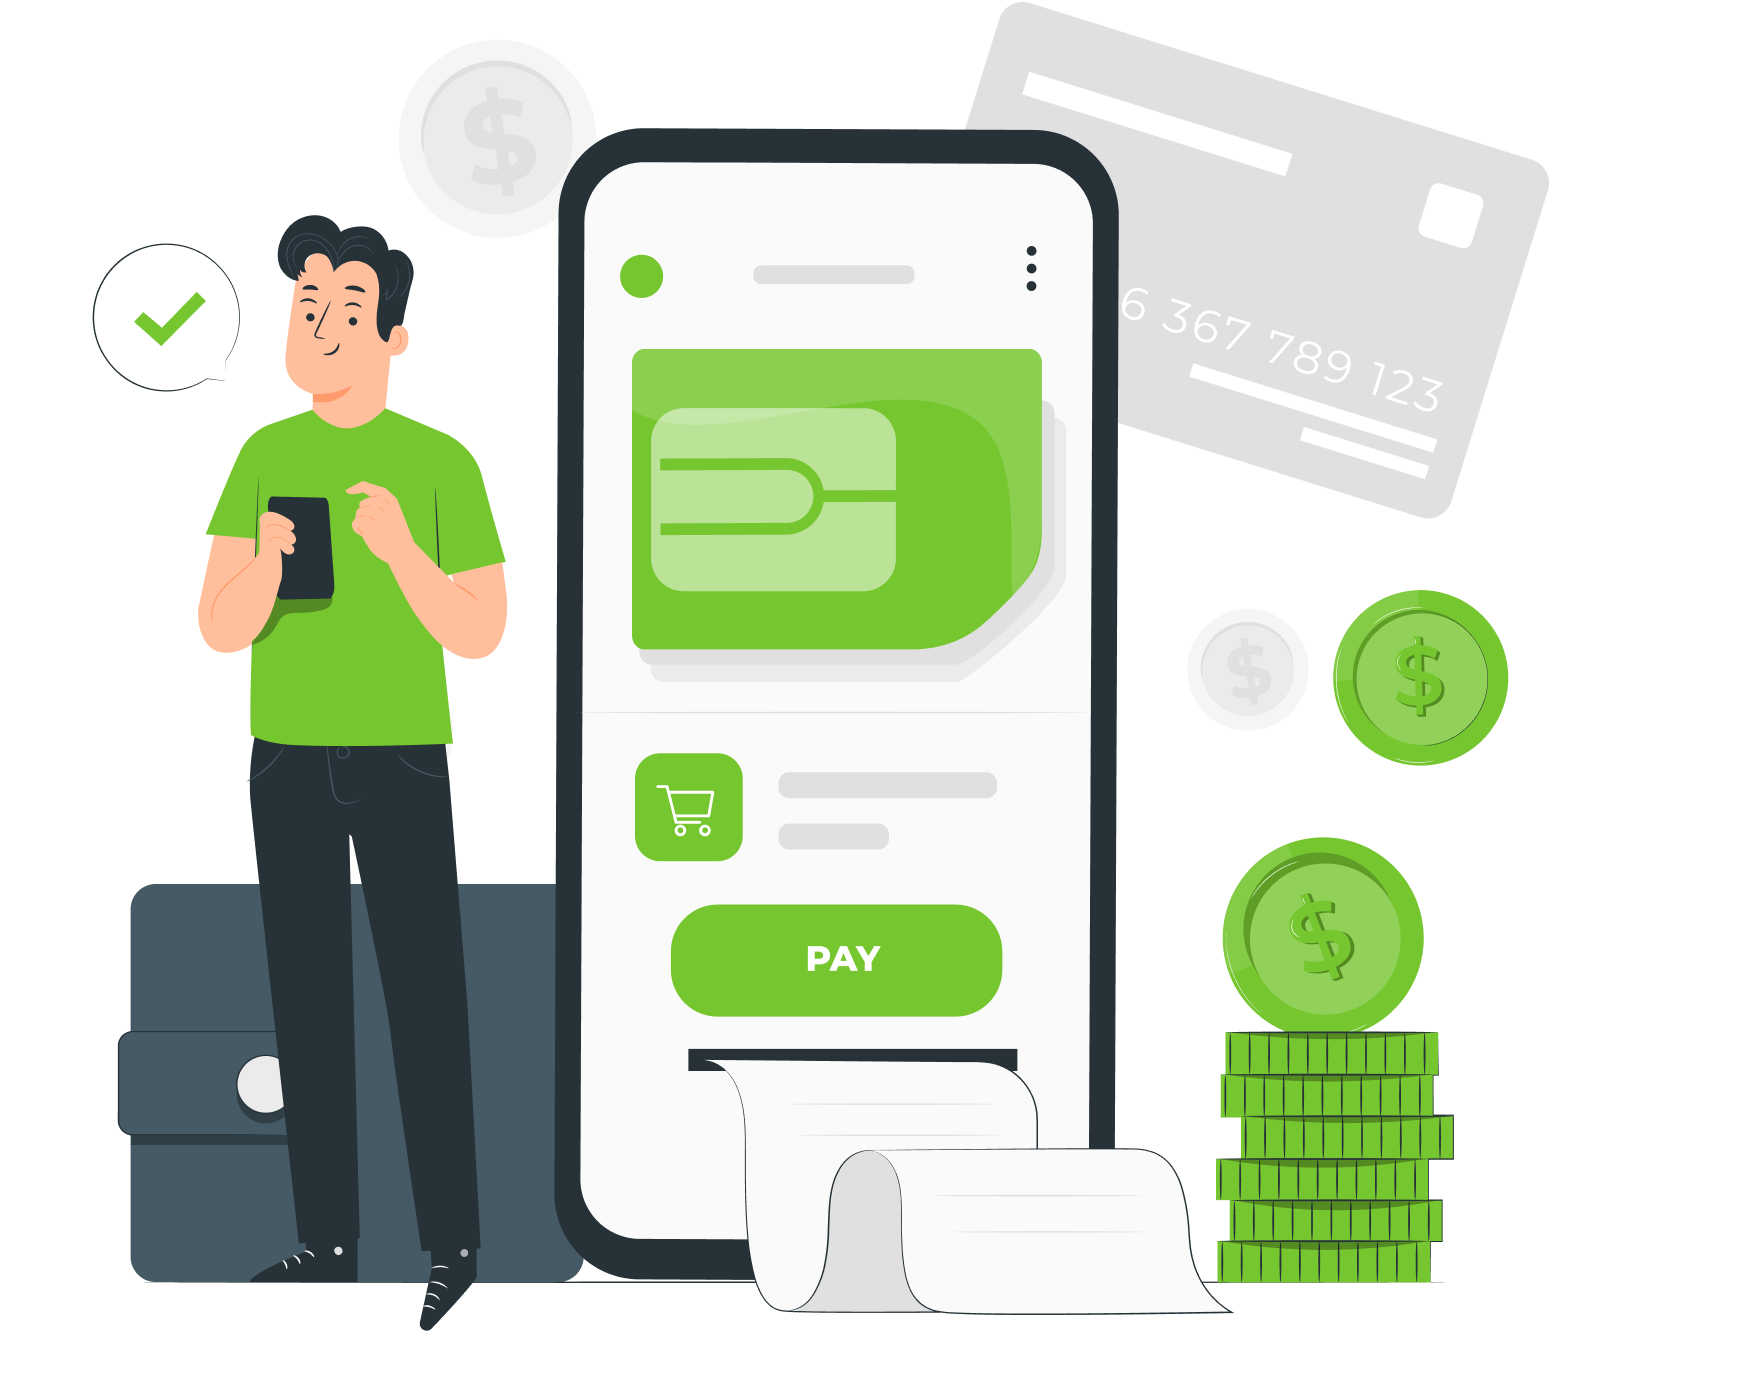 How to pay/ recharge your phone bill using  Pay?